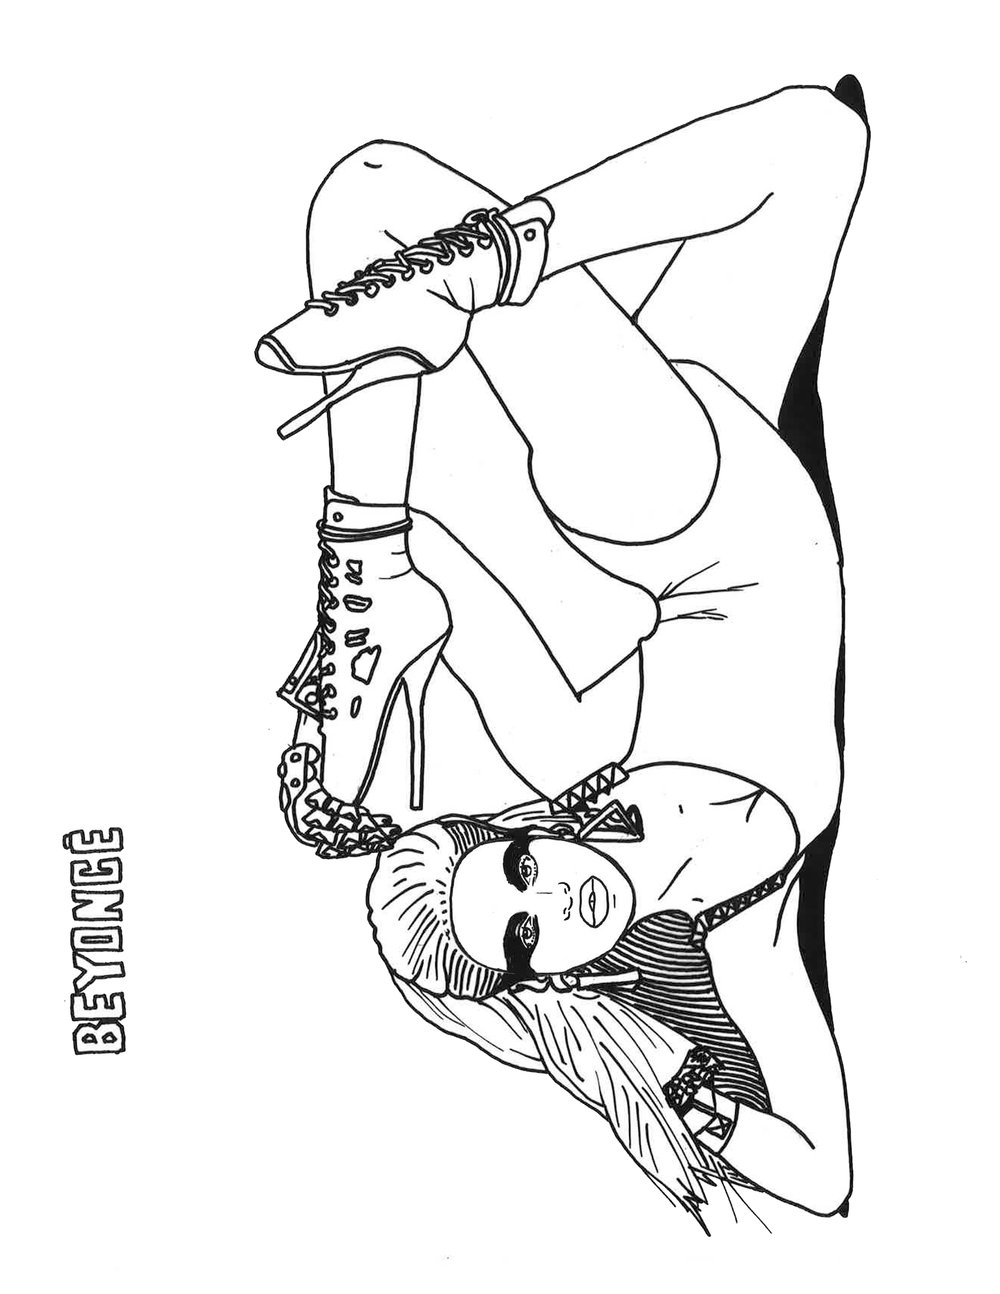 Image of Influential Women of Music Coloring Book Vol. 2